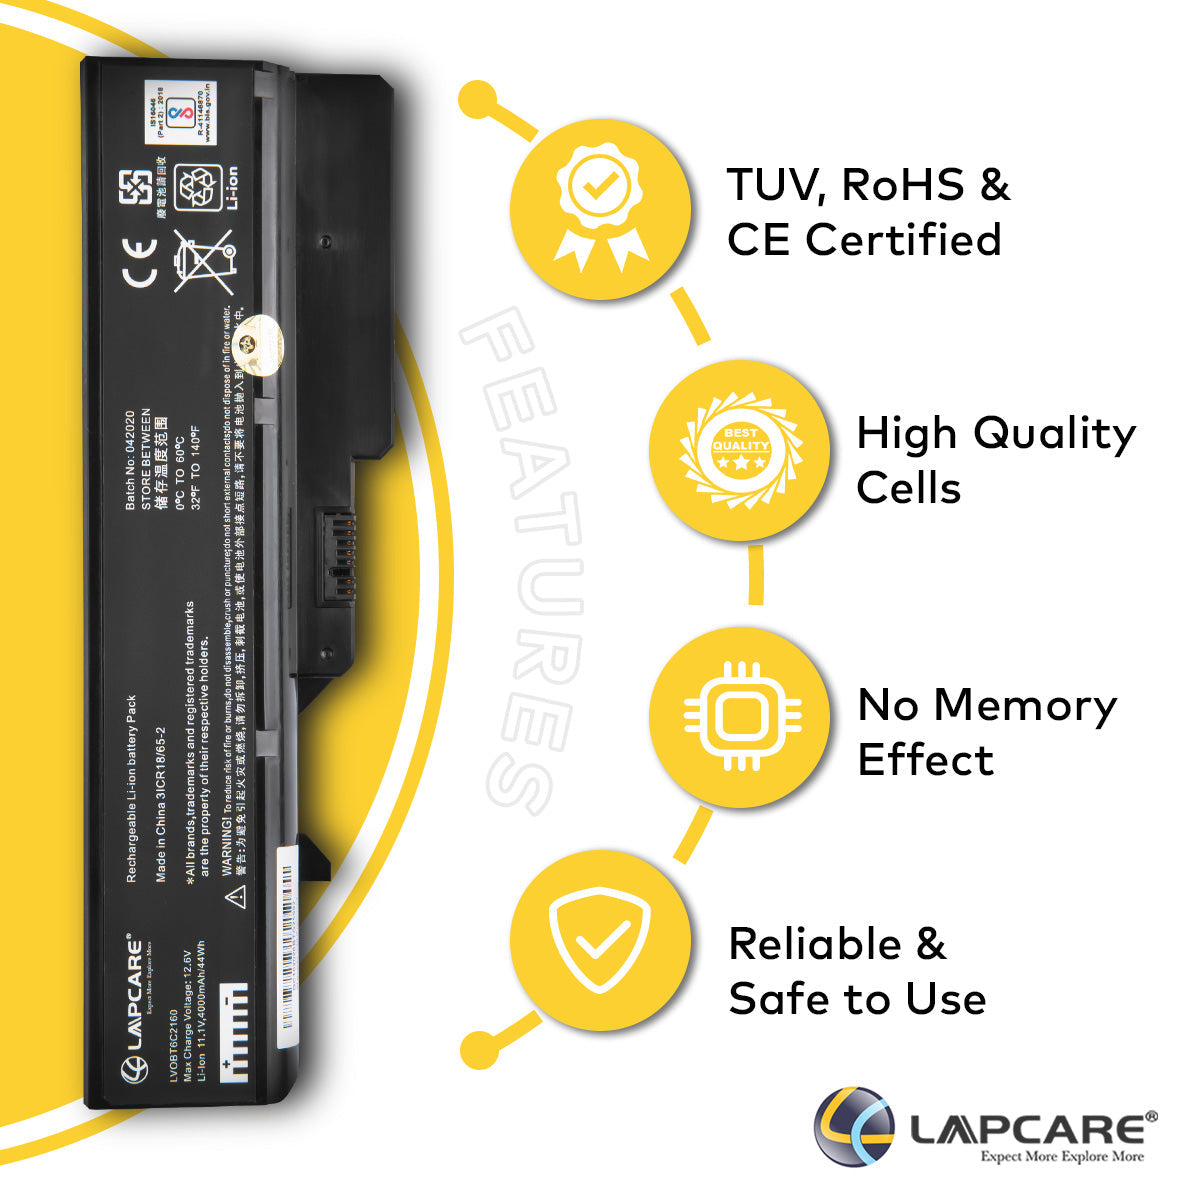 Lapcare_LVOBT6C2160_4000mAh_Laptop_Battery_From_The_Peripheral_Store